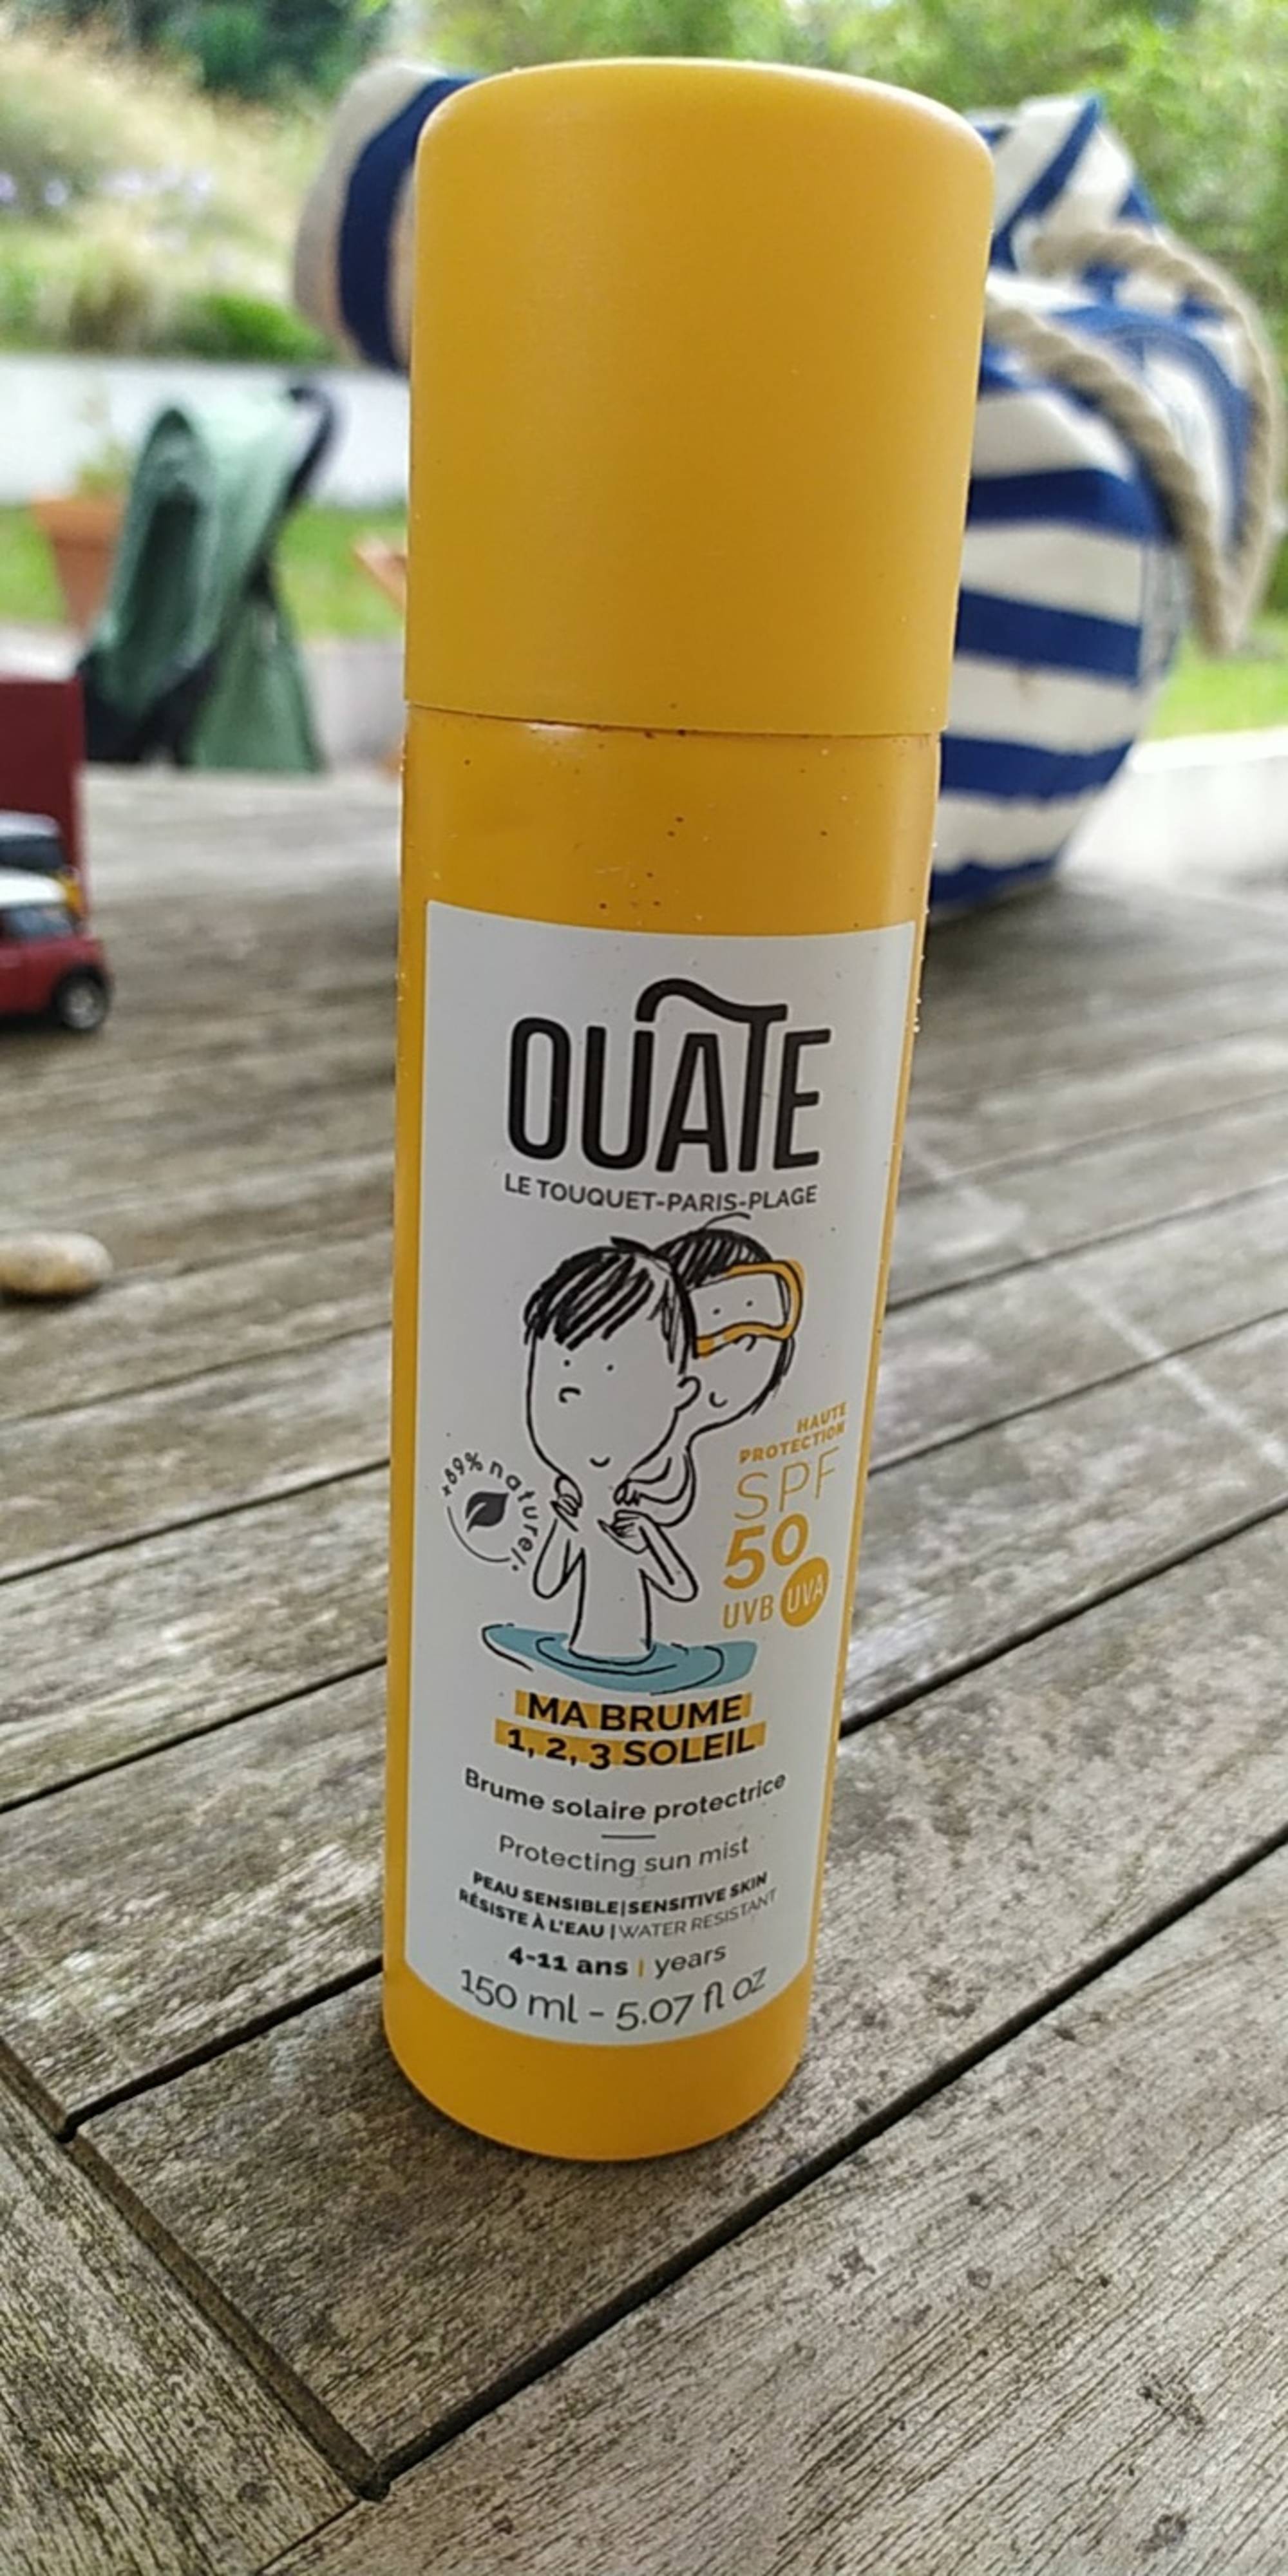 OUATE - Brume solaire protectrice SPF 50